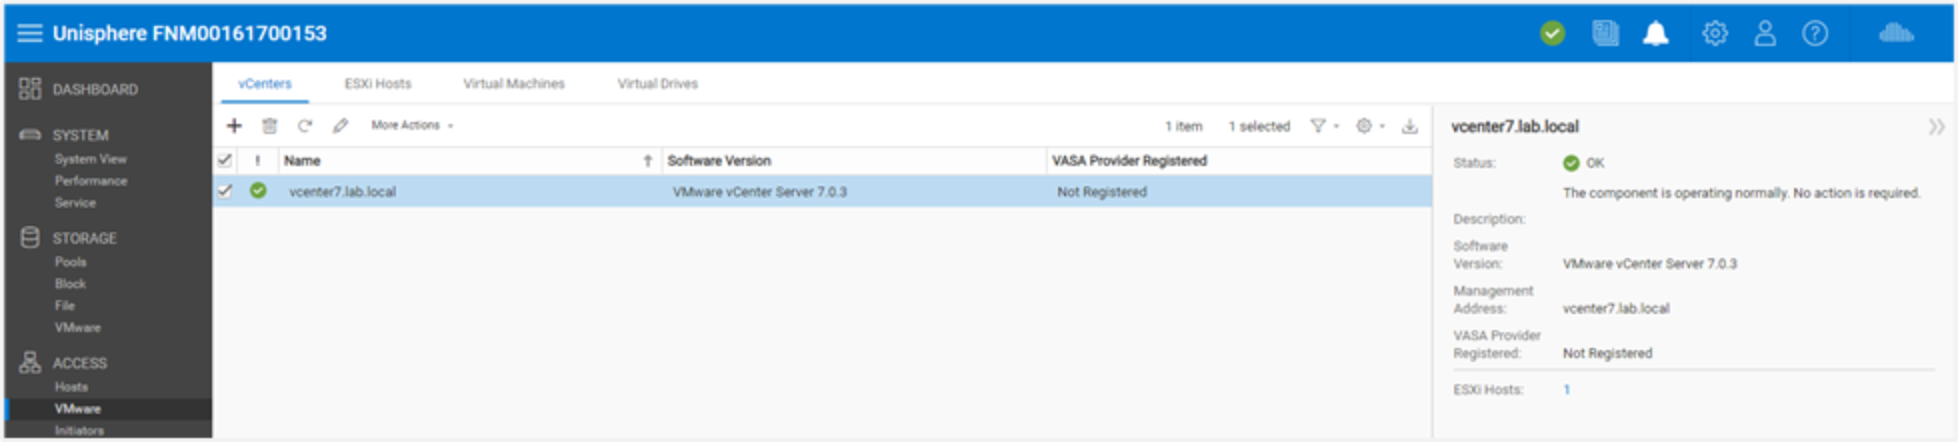 Example of a registered VMware vCenter for VMware integration with a Dell Unity System